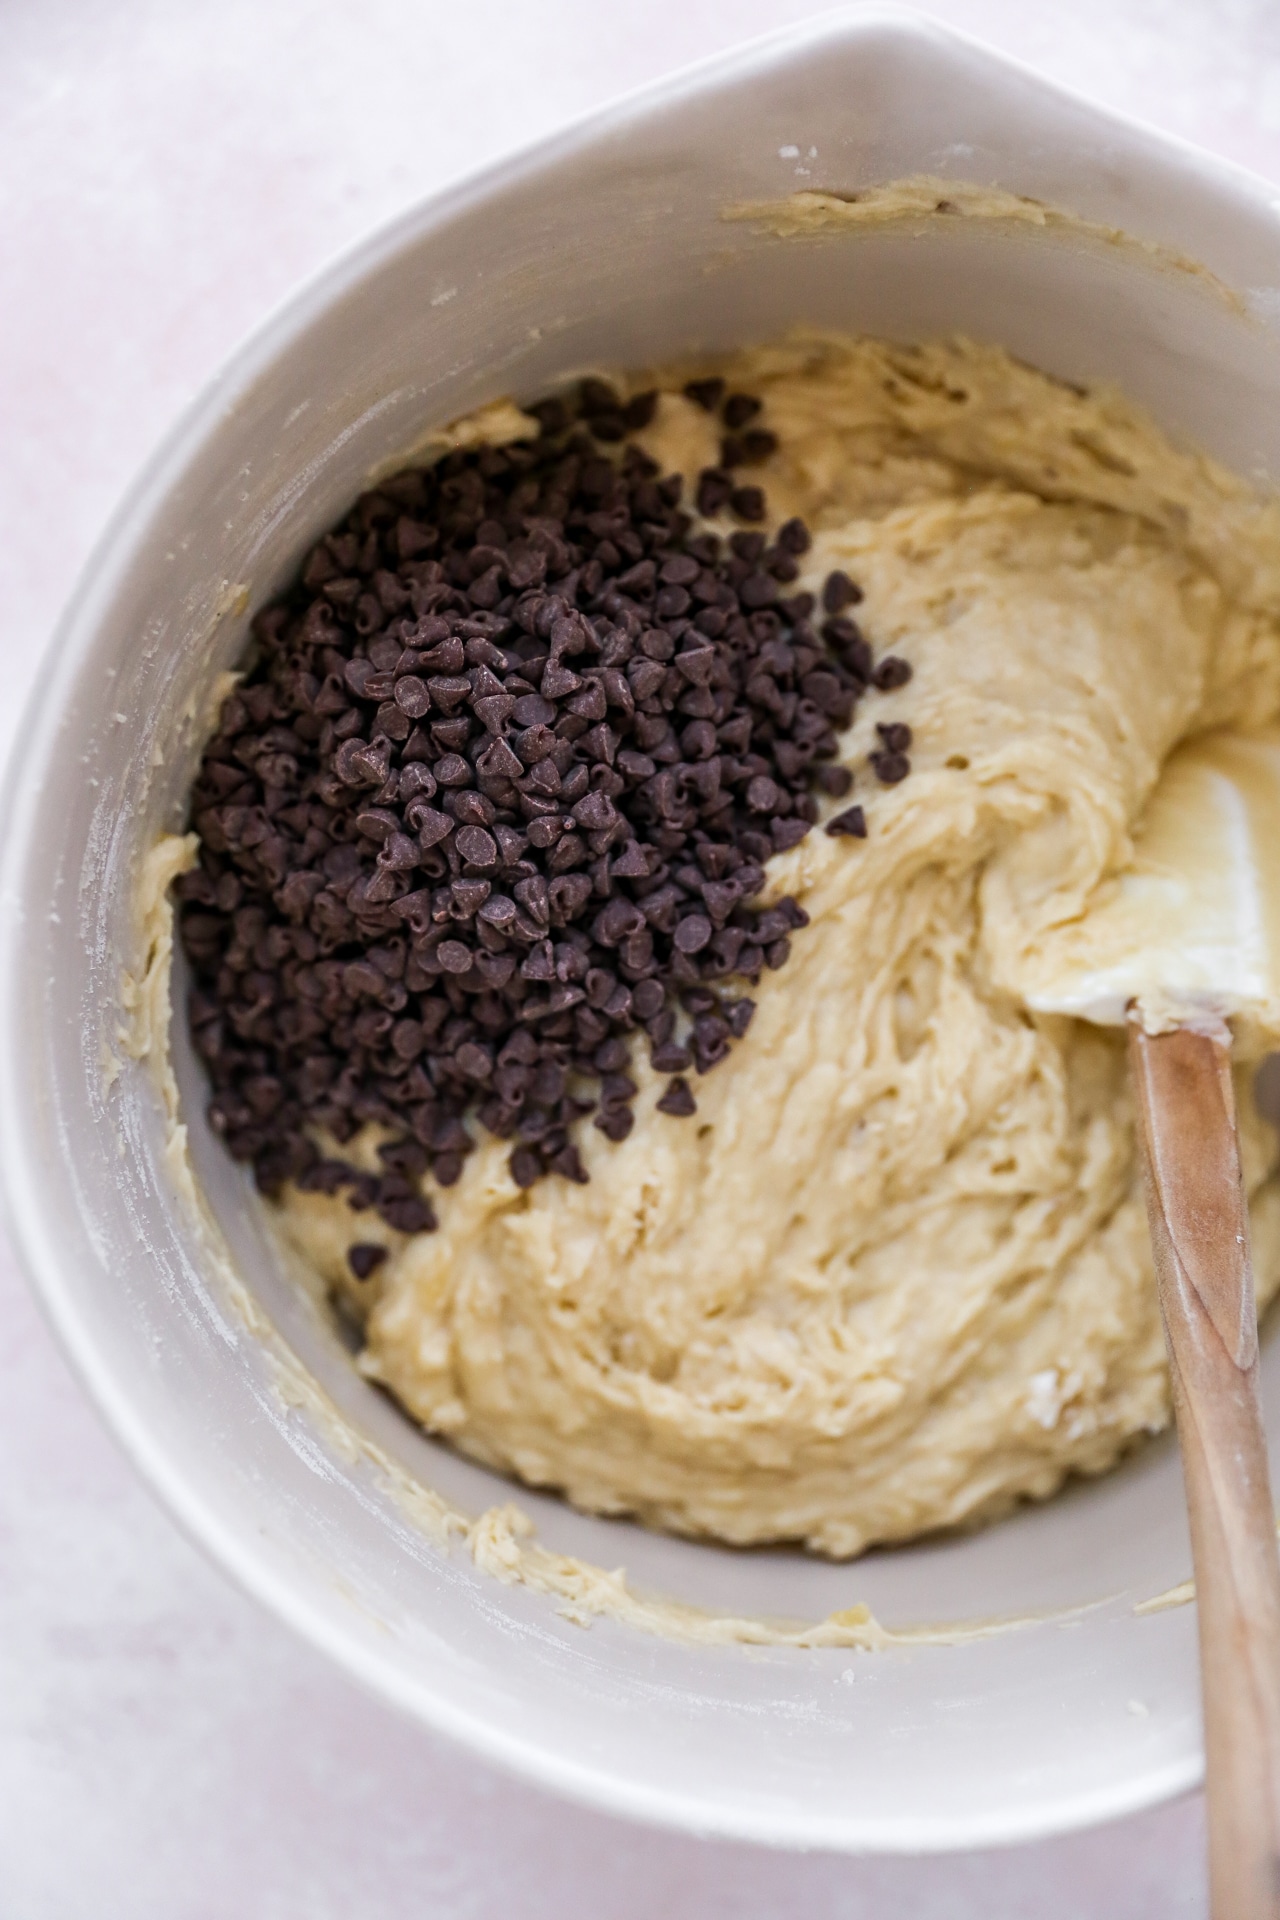 Adding chocolate chips to muffin batter.